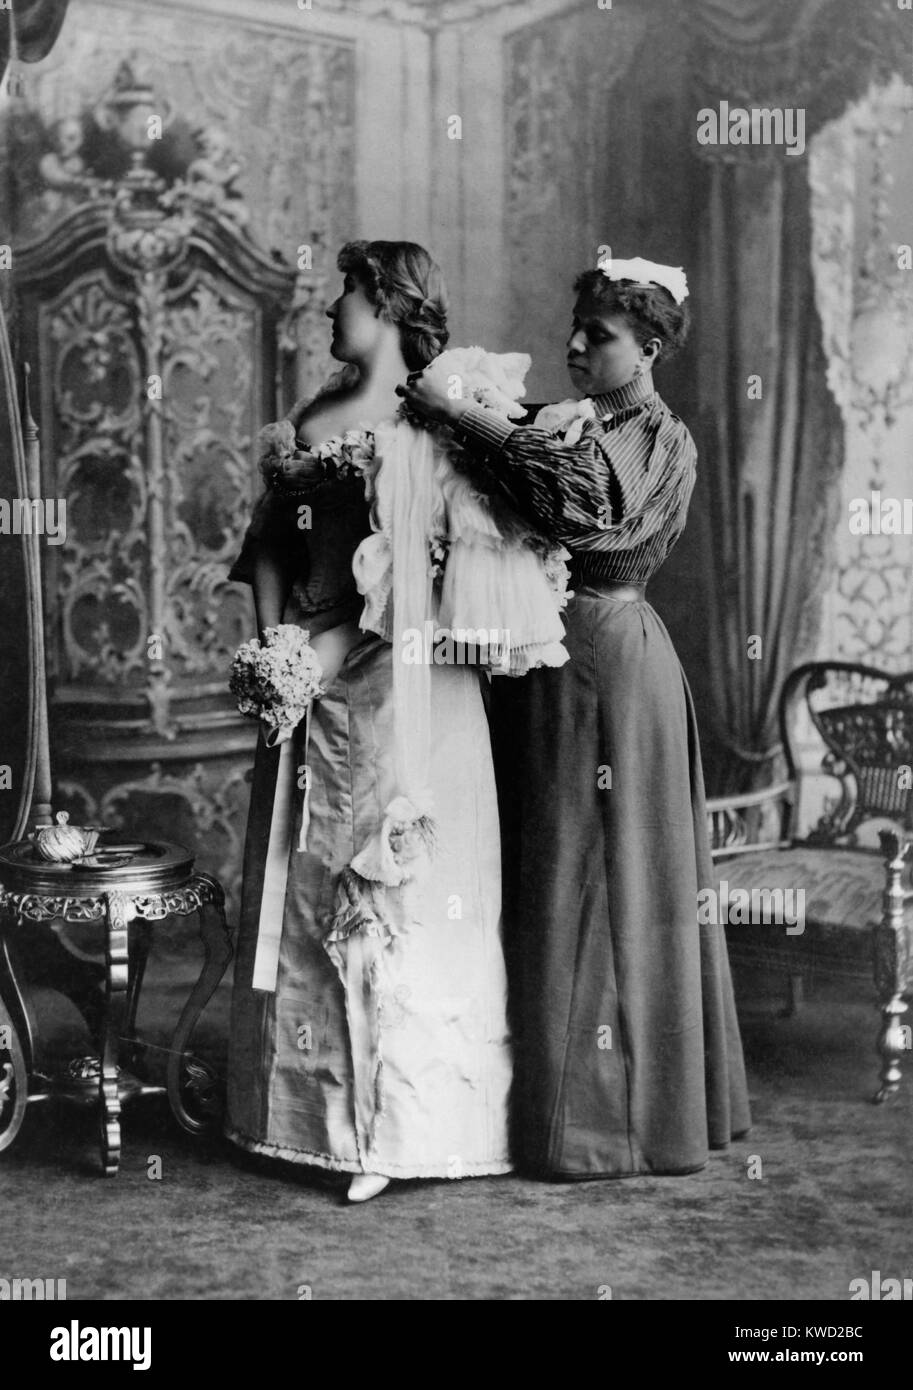 African American ladys maid helps a wealthy woman get dressed in luxurious evening gown, 1897.  (BSLOC 2017 20 111) Stock Photo